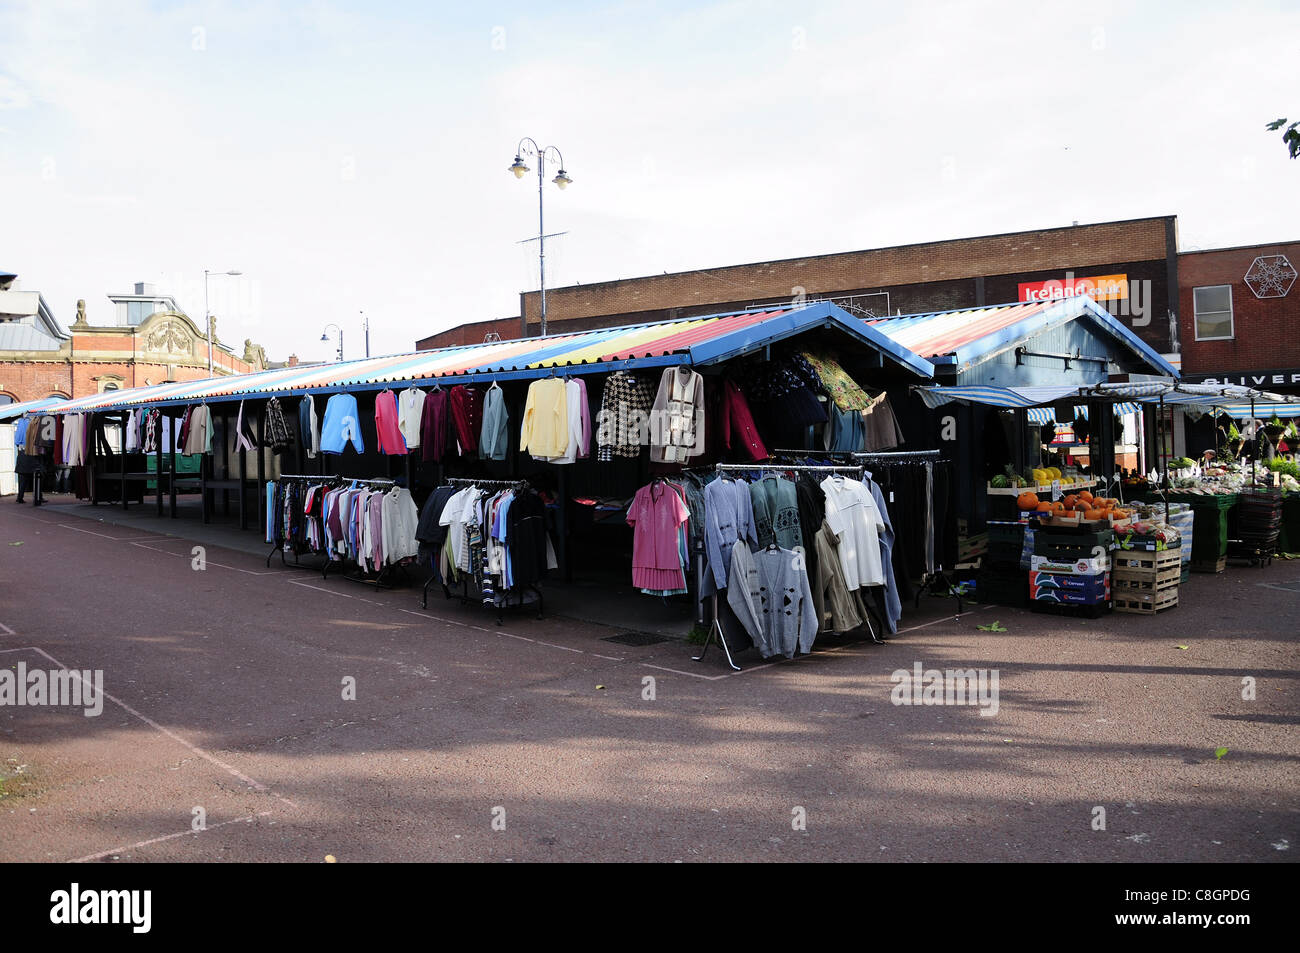 Ashton-under-Lyne market looking towards indoor market with clothing and fruit and vegetable stall Stock Photo